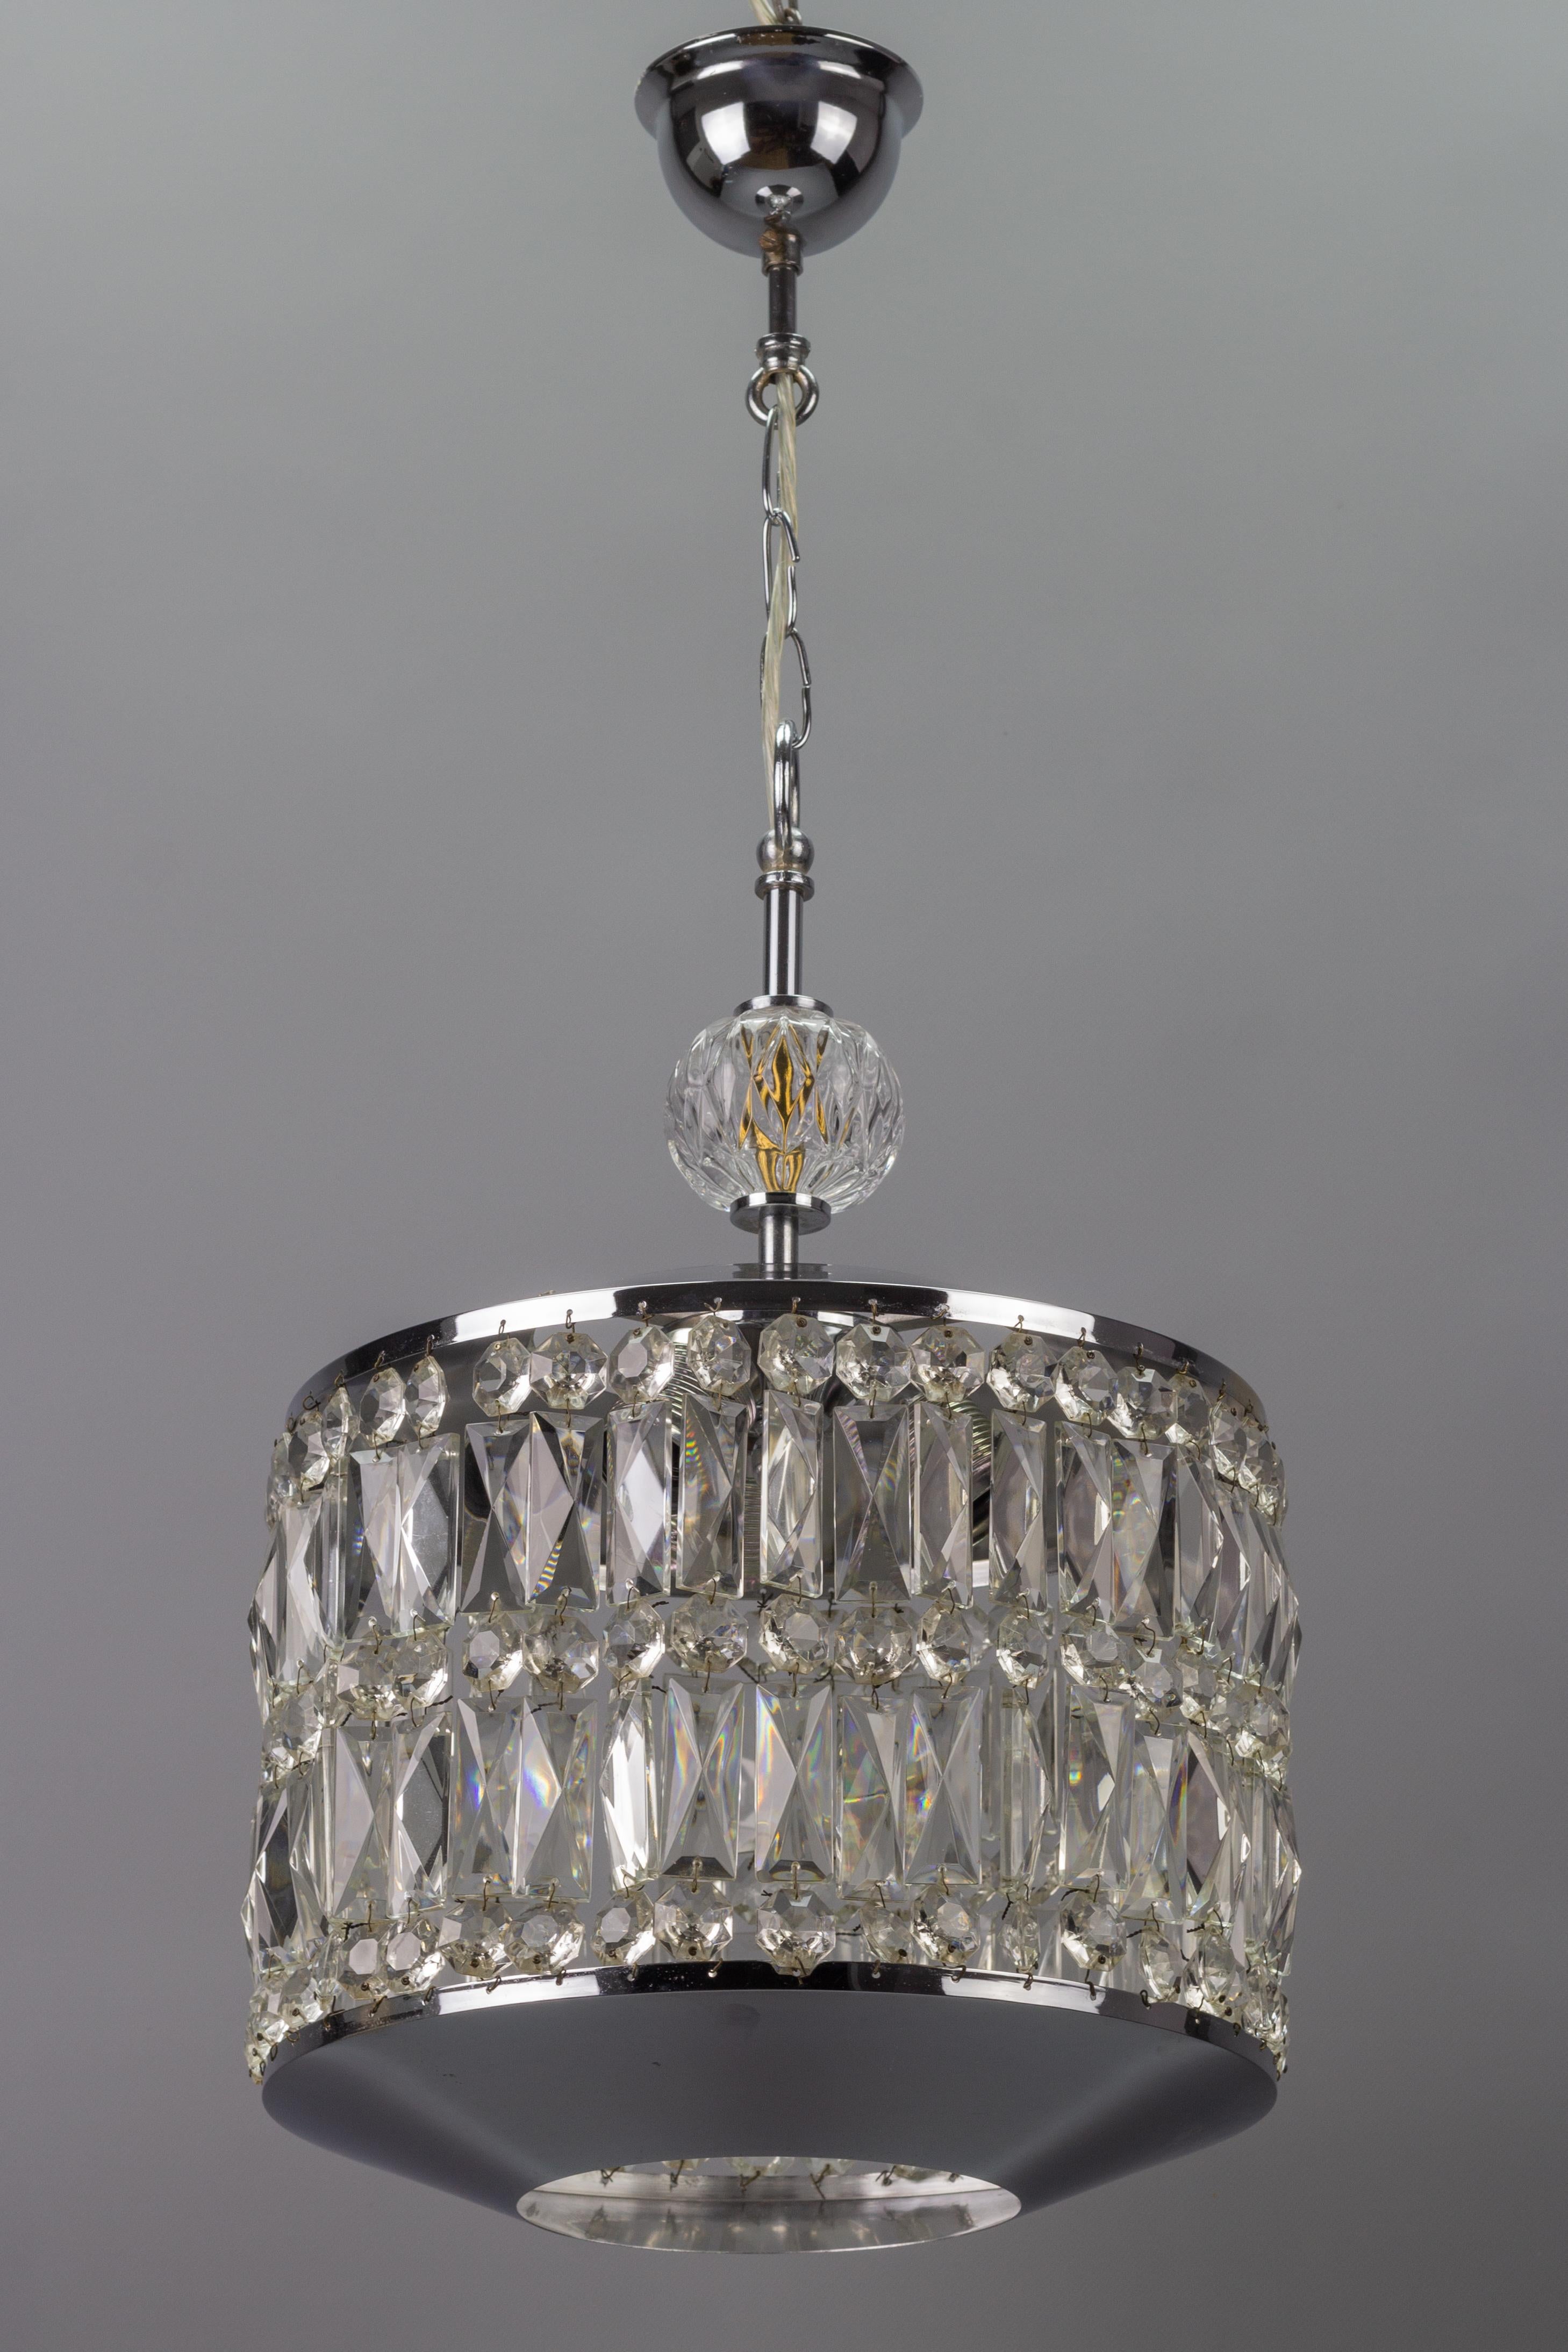 Impressive Mid-Century Modern crystal glass and chrome pendant light with three interior lights. 
Light reflects beautifully from the crystal glass prisms and beads, creating plays of light and shadow.
Three sockets for E27 (E26) size light